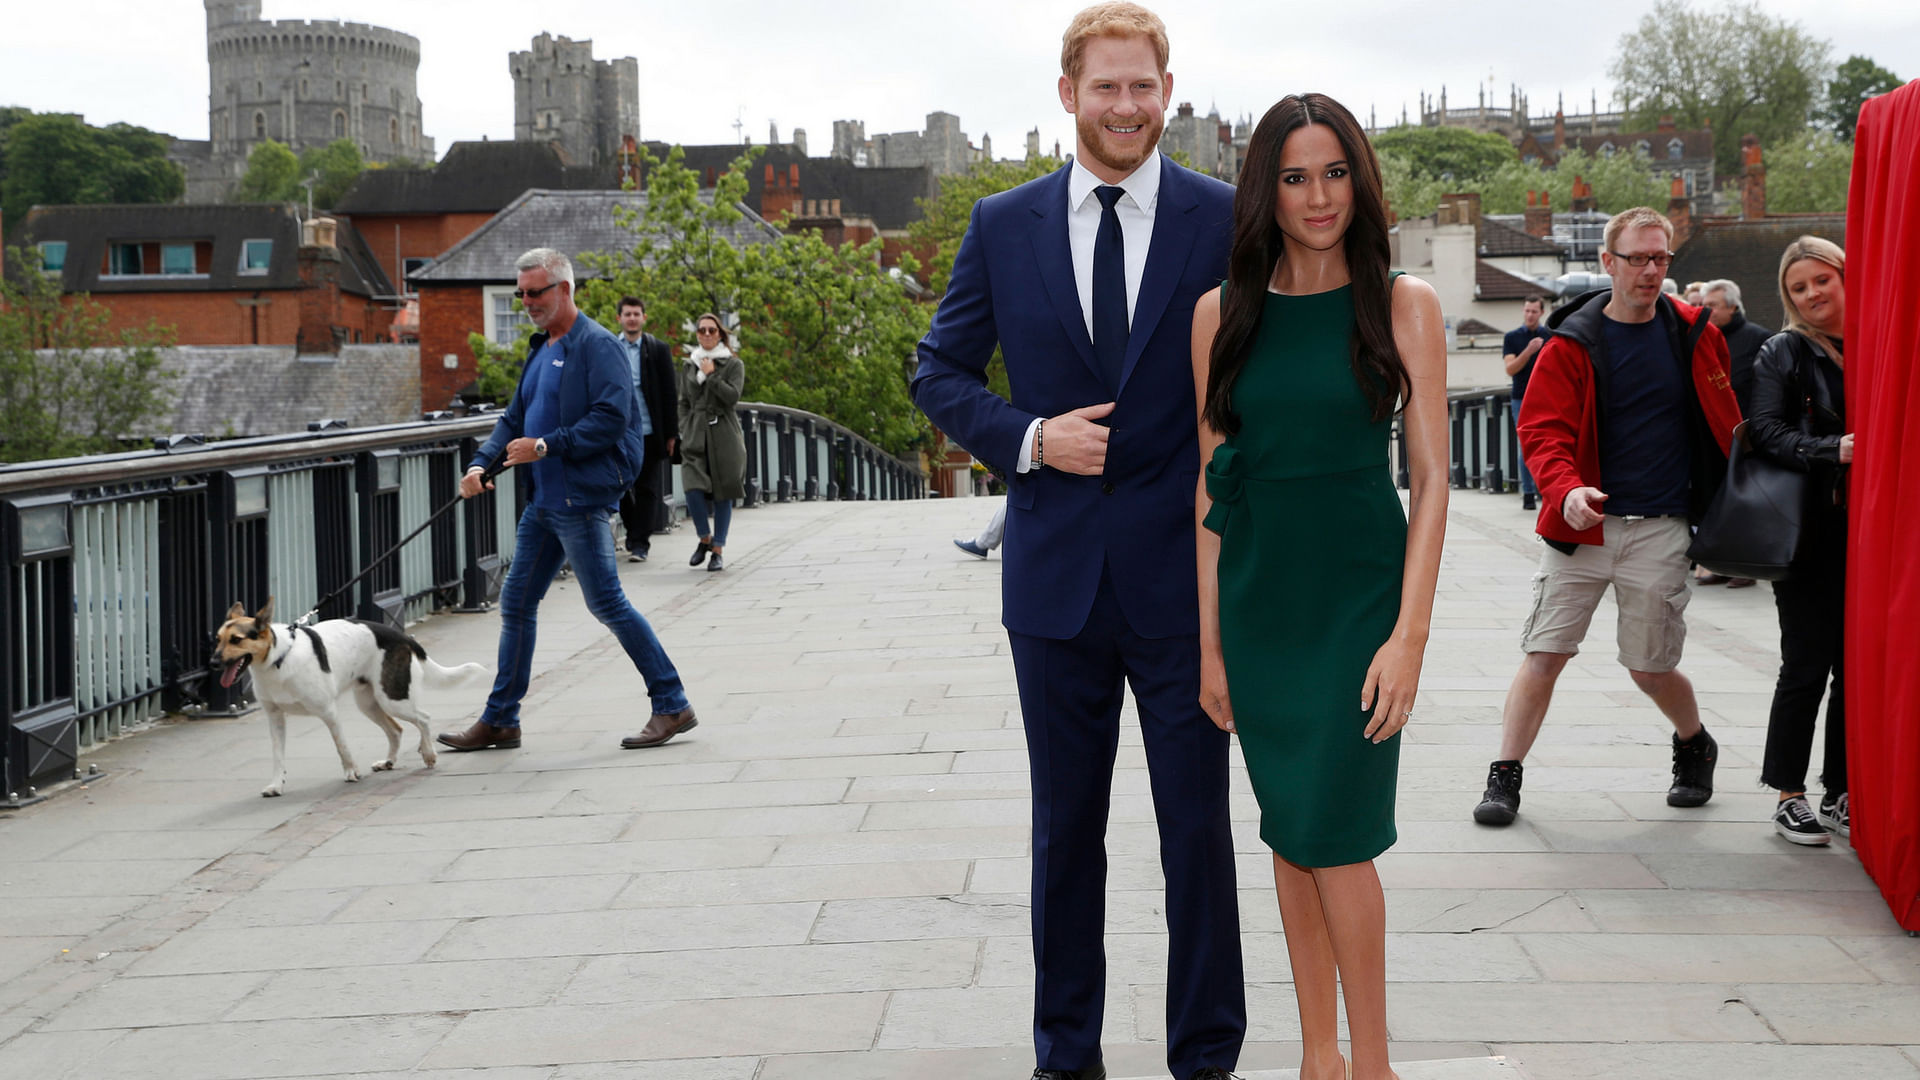 Waxwork figures of Britain’s Prince Harry and Meghan Markle.